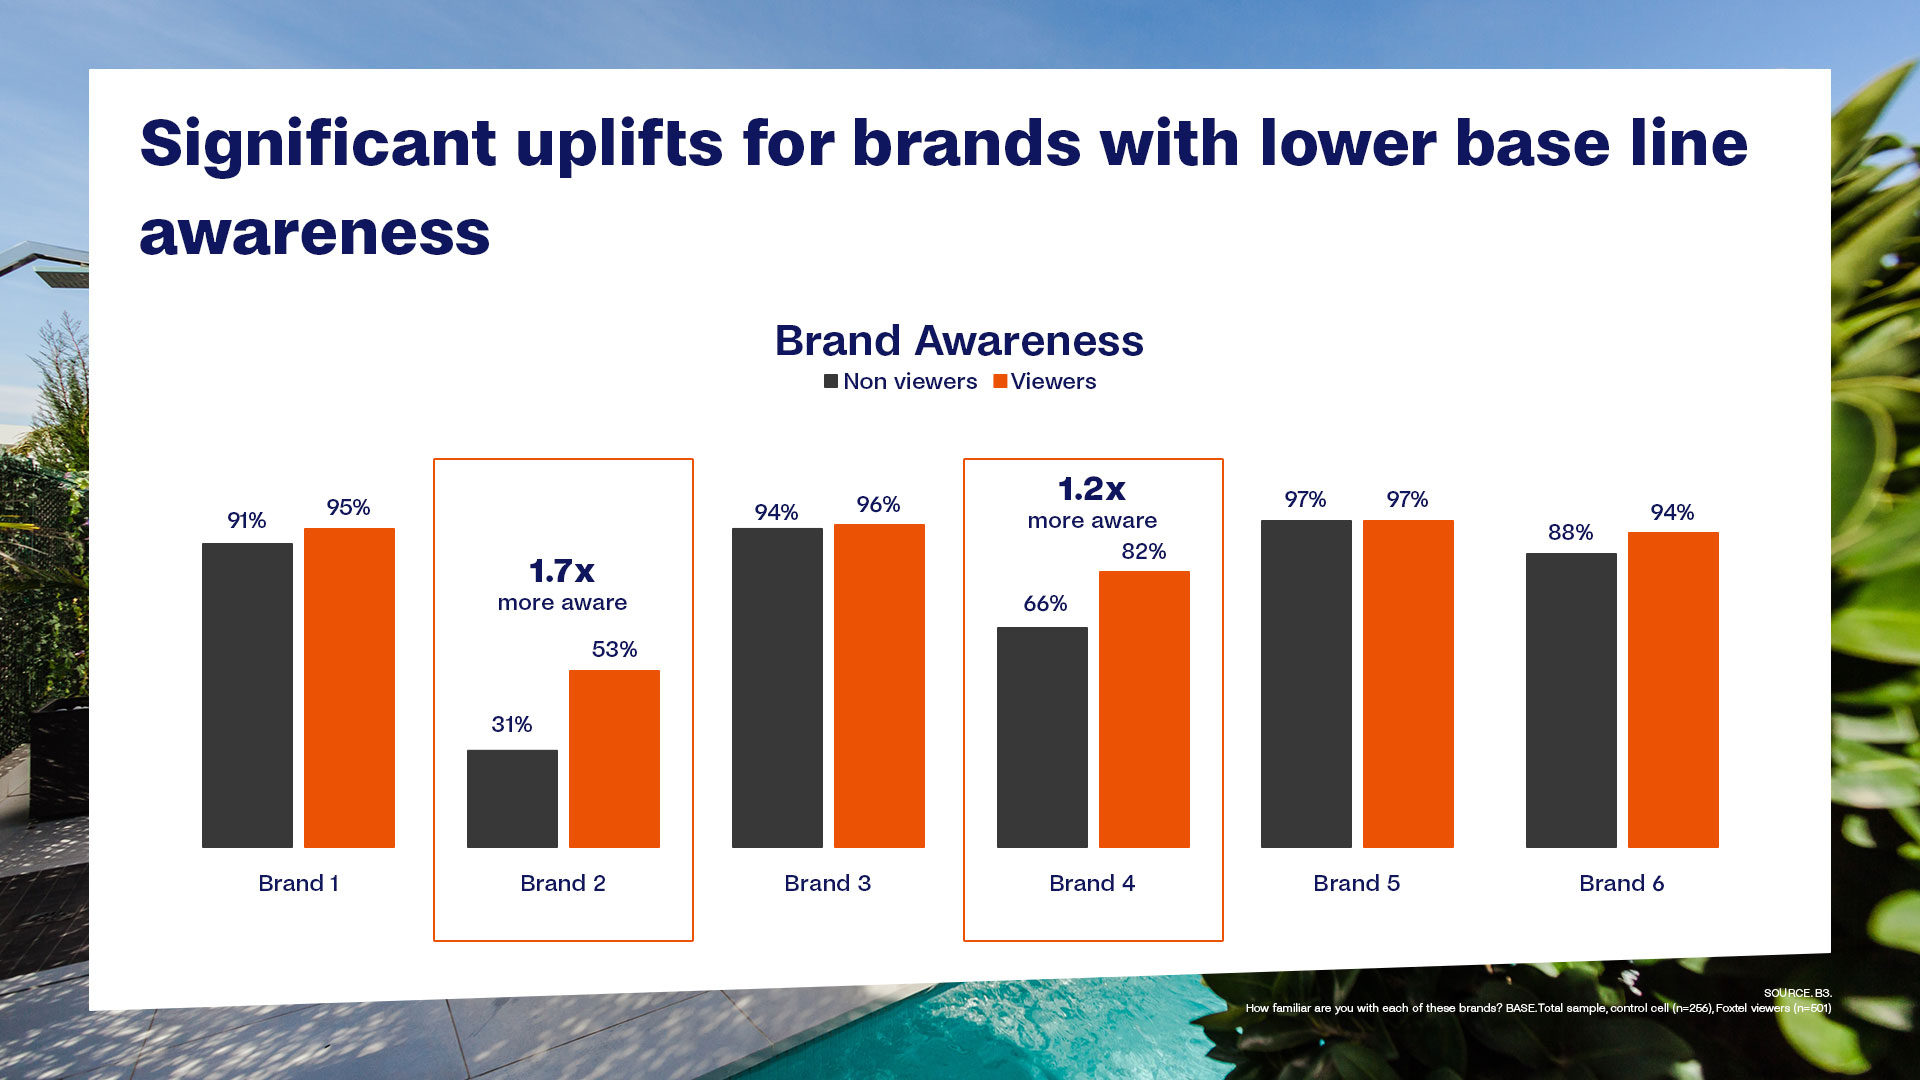 Significant uplifts for brands with lower base line awareness